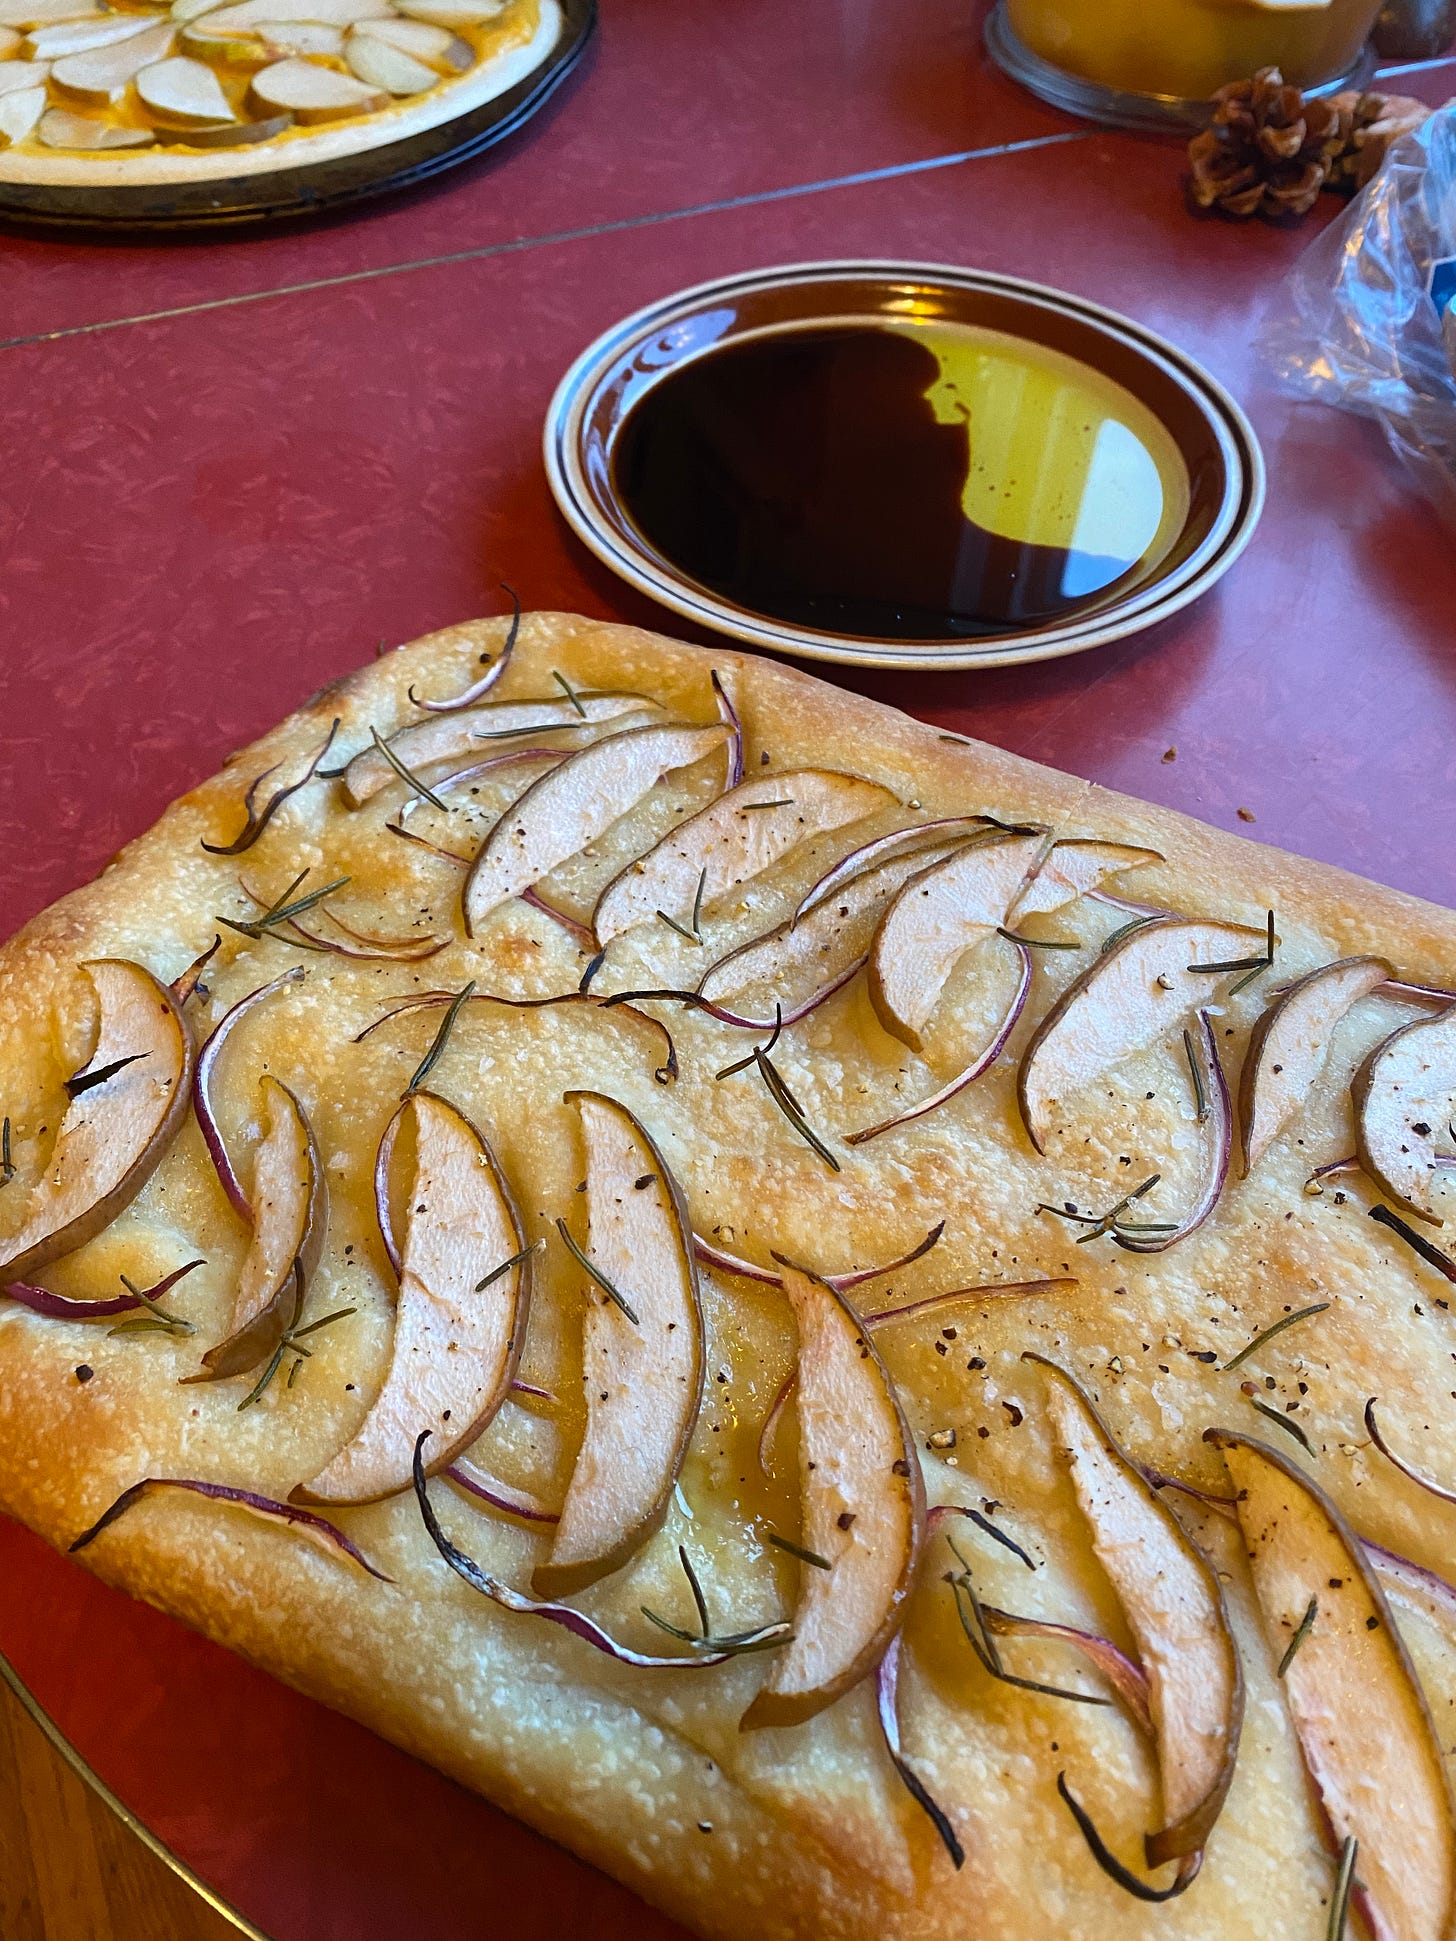 A whole focaccia bread topped with slices of pear and red onion and rosemary leaves on a red table. Behind it is a small plate of oil and balsamic vinegar.